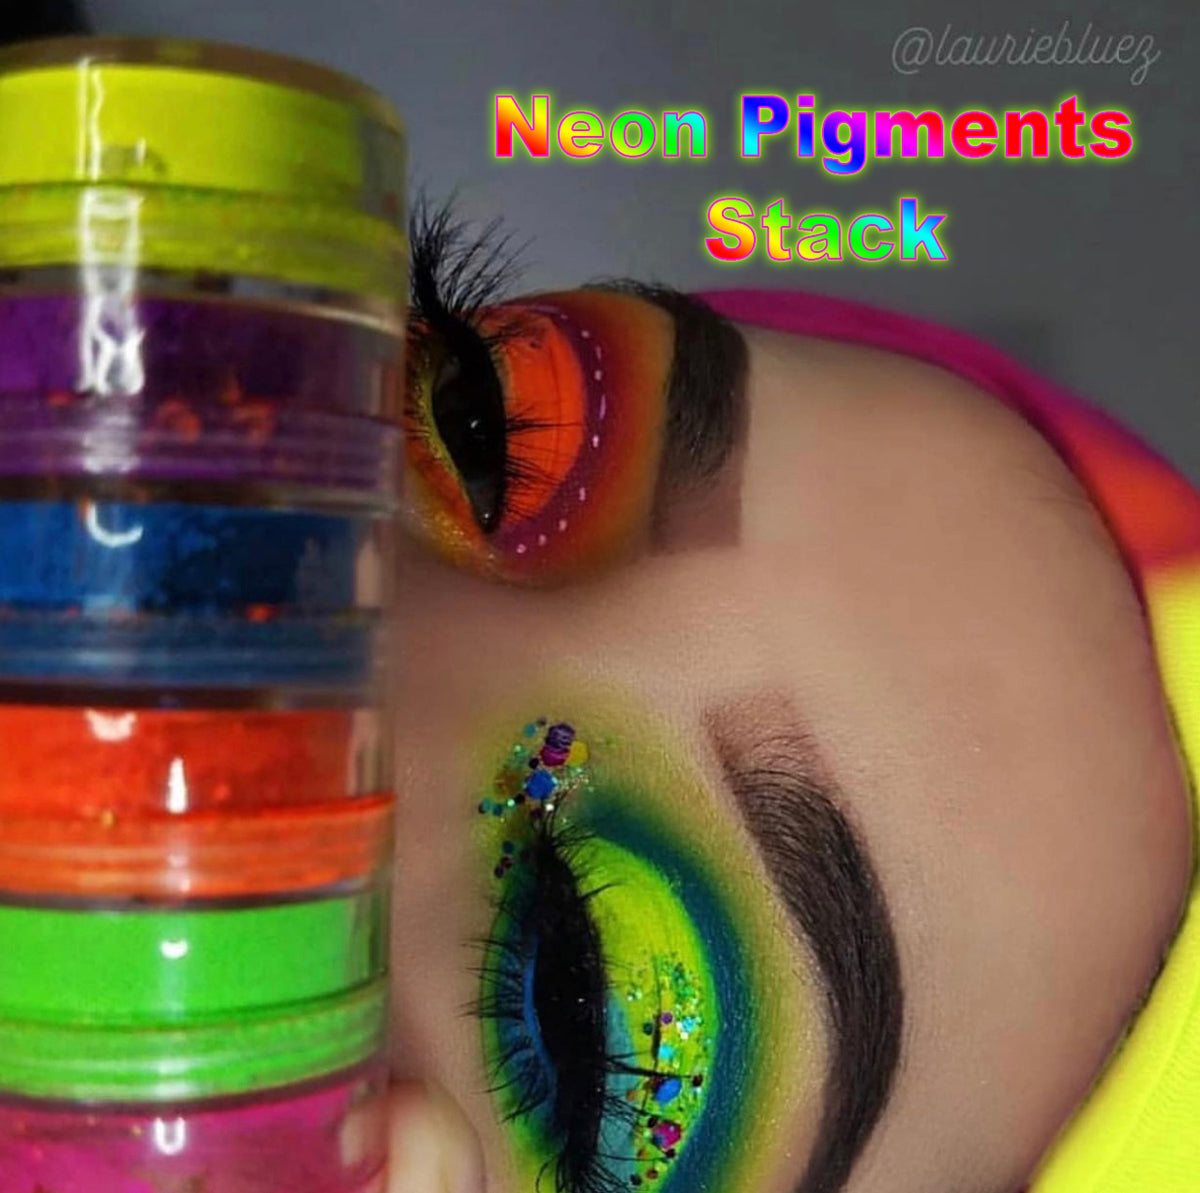 Neon Pigments Stack of 6